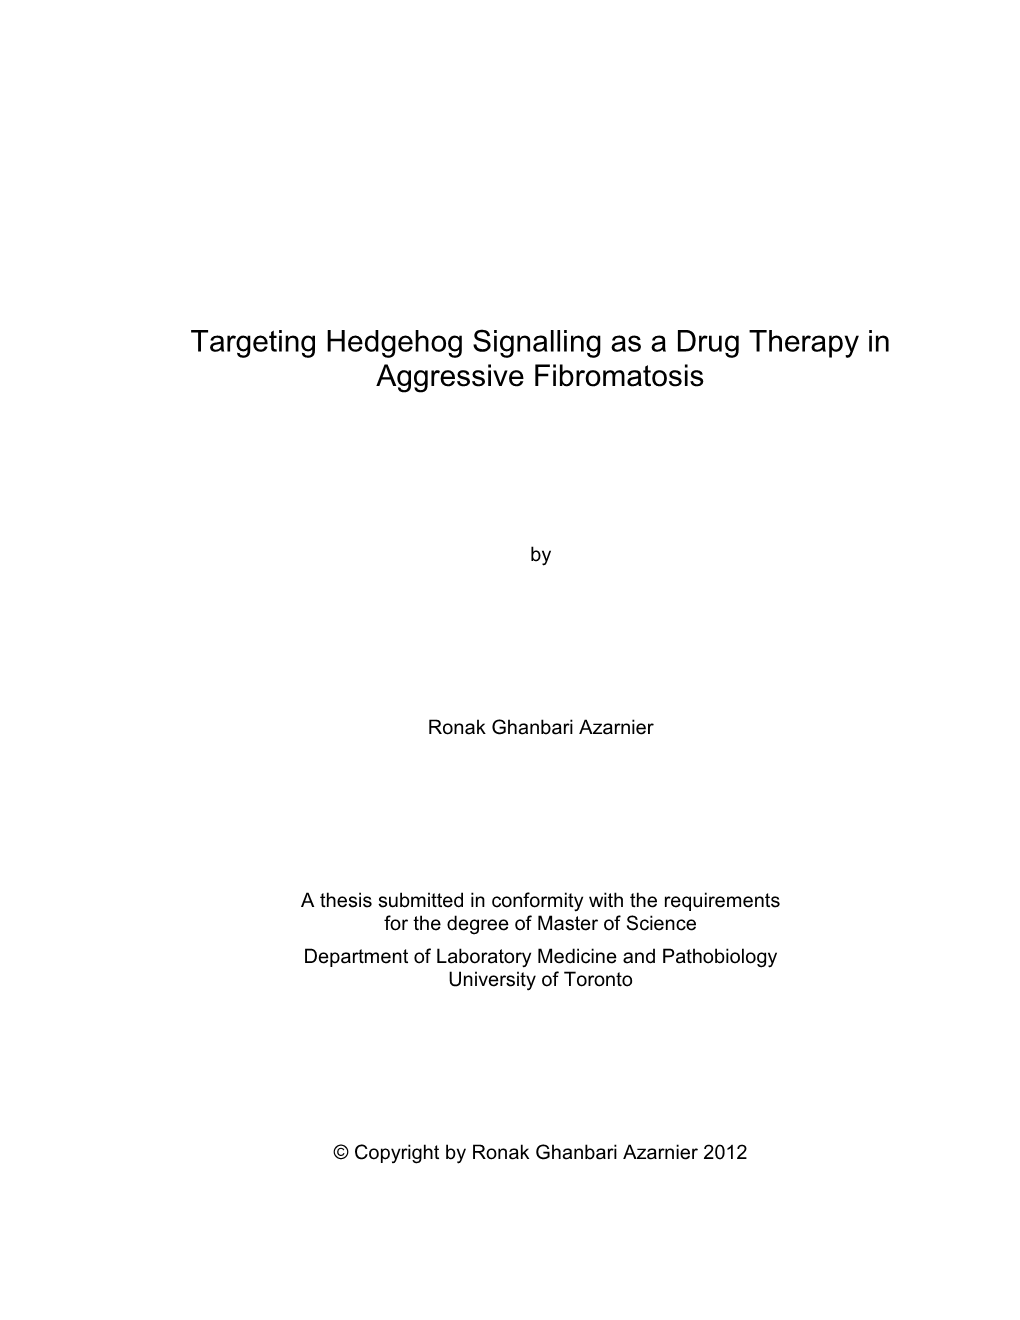 Targeting Hedgehog Signalling As a Drug Therapy in Aggressive Fibromatosis